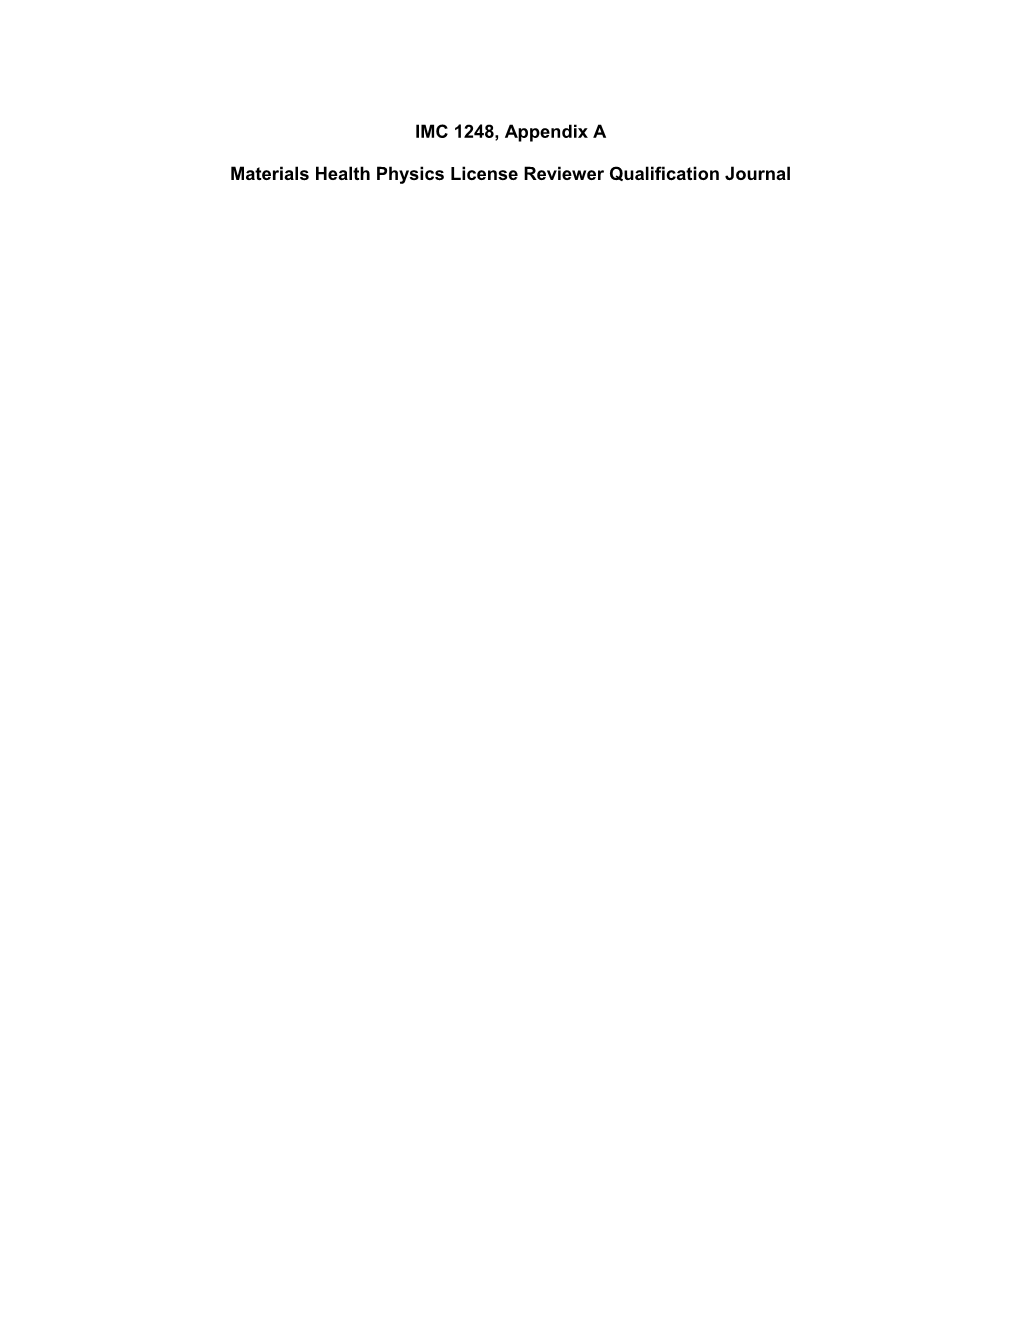 Materials Health Physics License Reviewer Qualification Journal